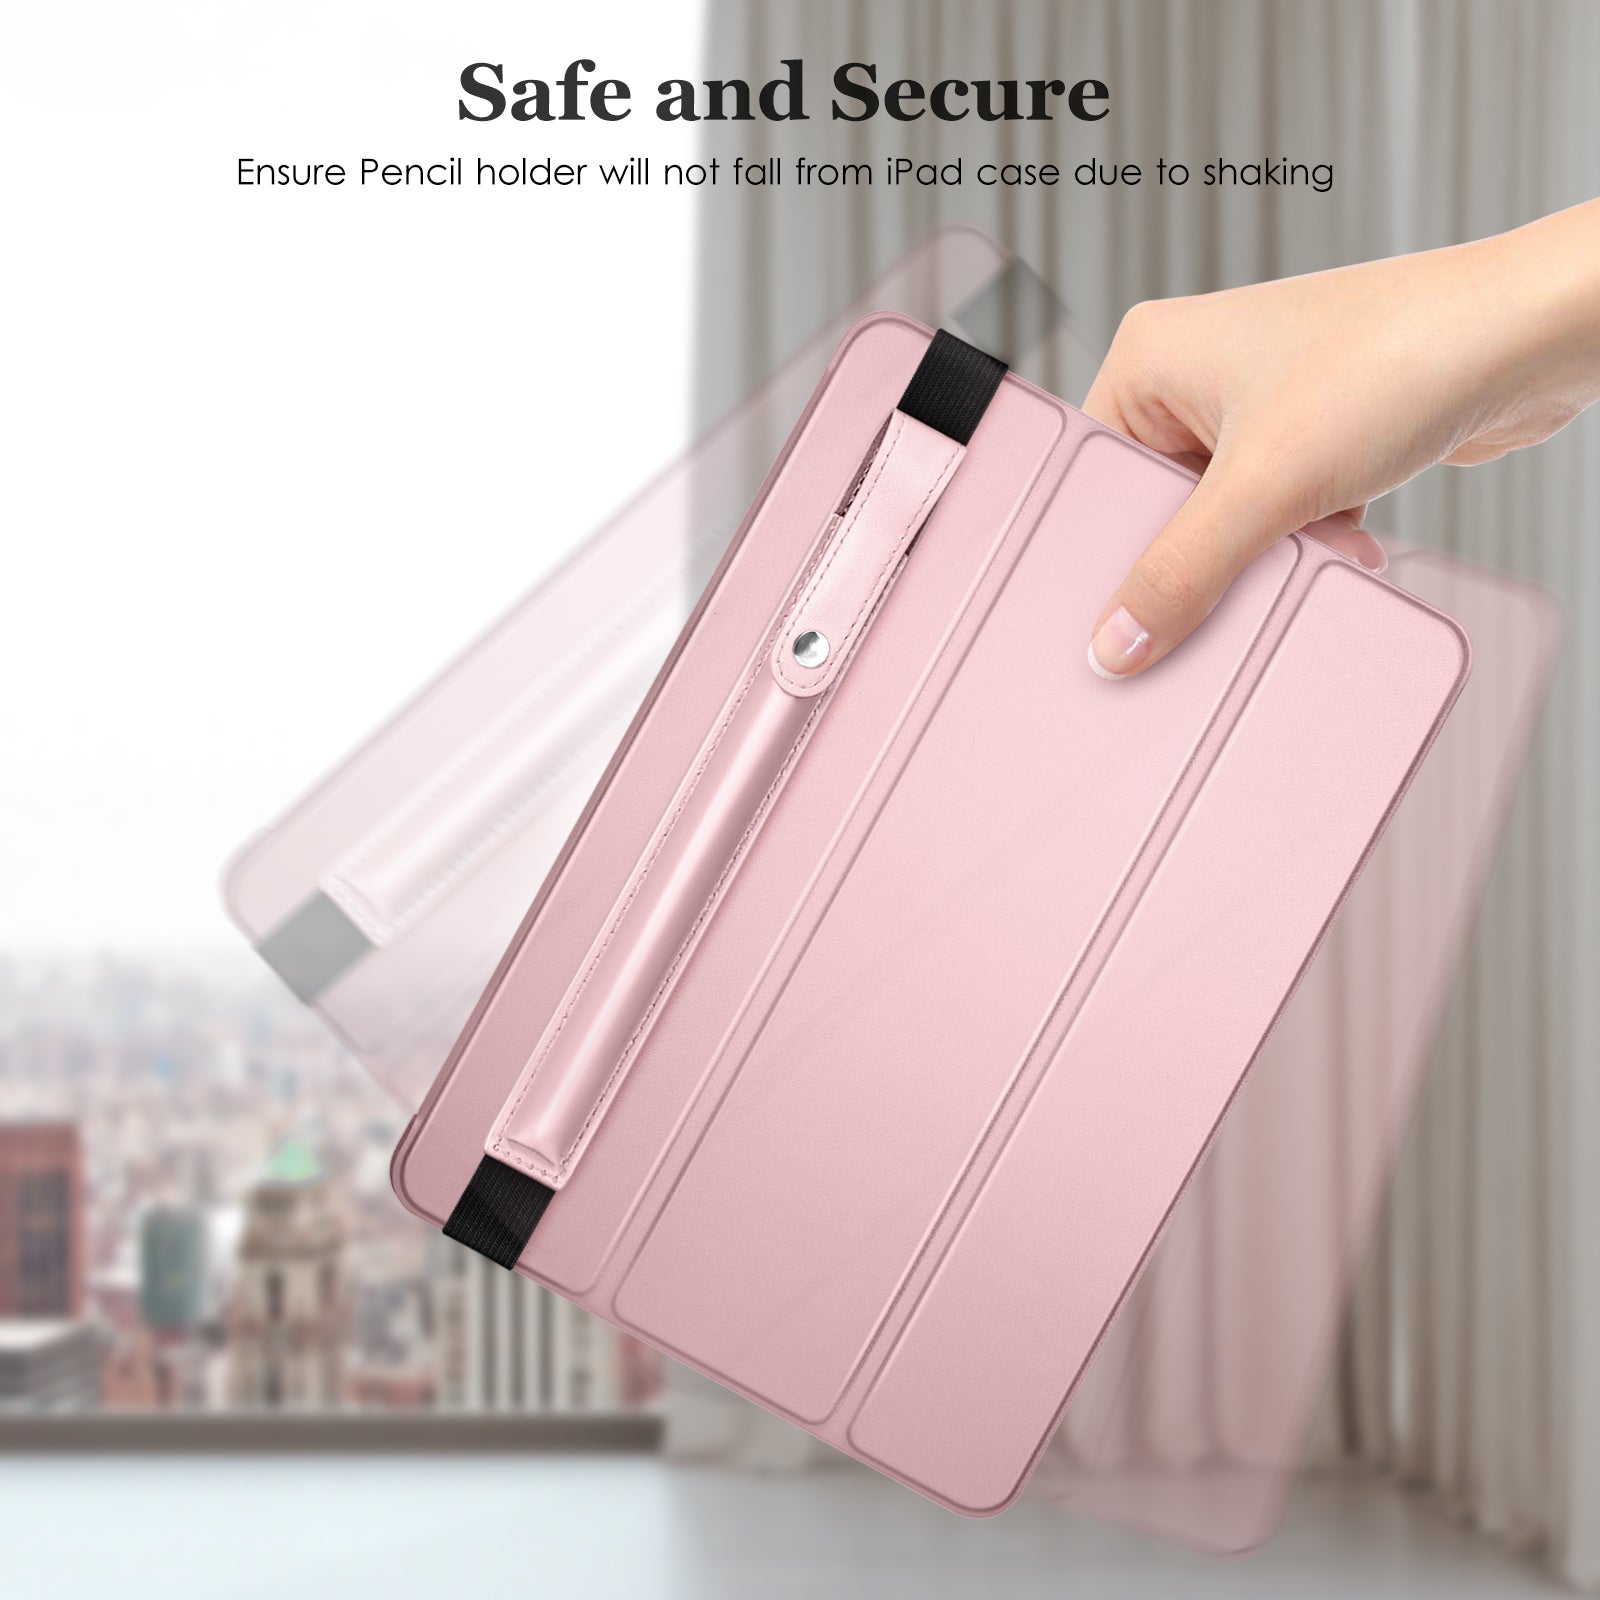 DTTO Pencil Case for Apple Pencil 1st/2nd Generation, PU Leather Pencil Sleeve Pouch with Detachable Elastic Band for iPad 9.7"/ 10.2"/ 10.5"/ 10.9"/ 11"/ 12.9" Case, Mint Green